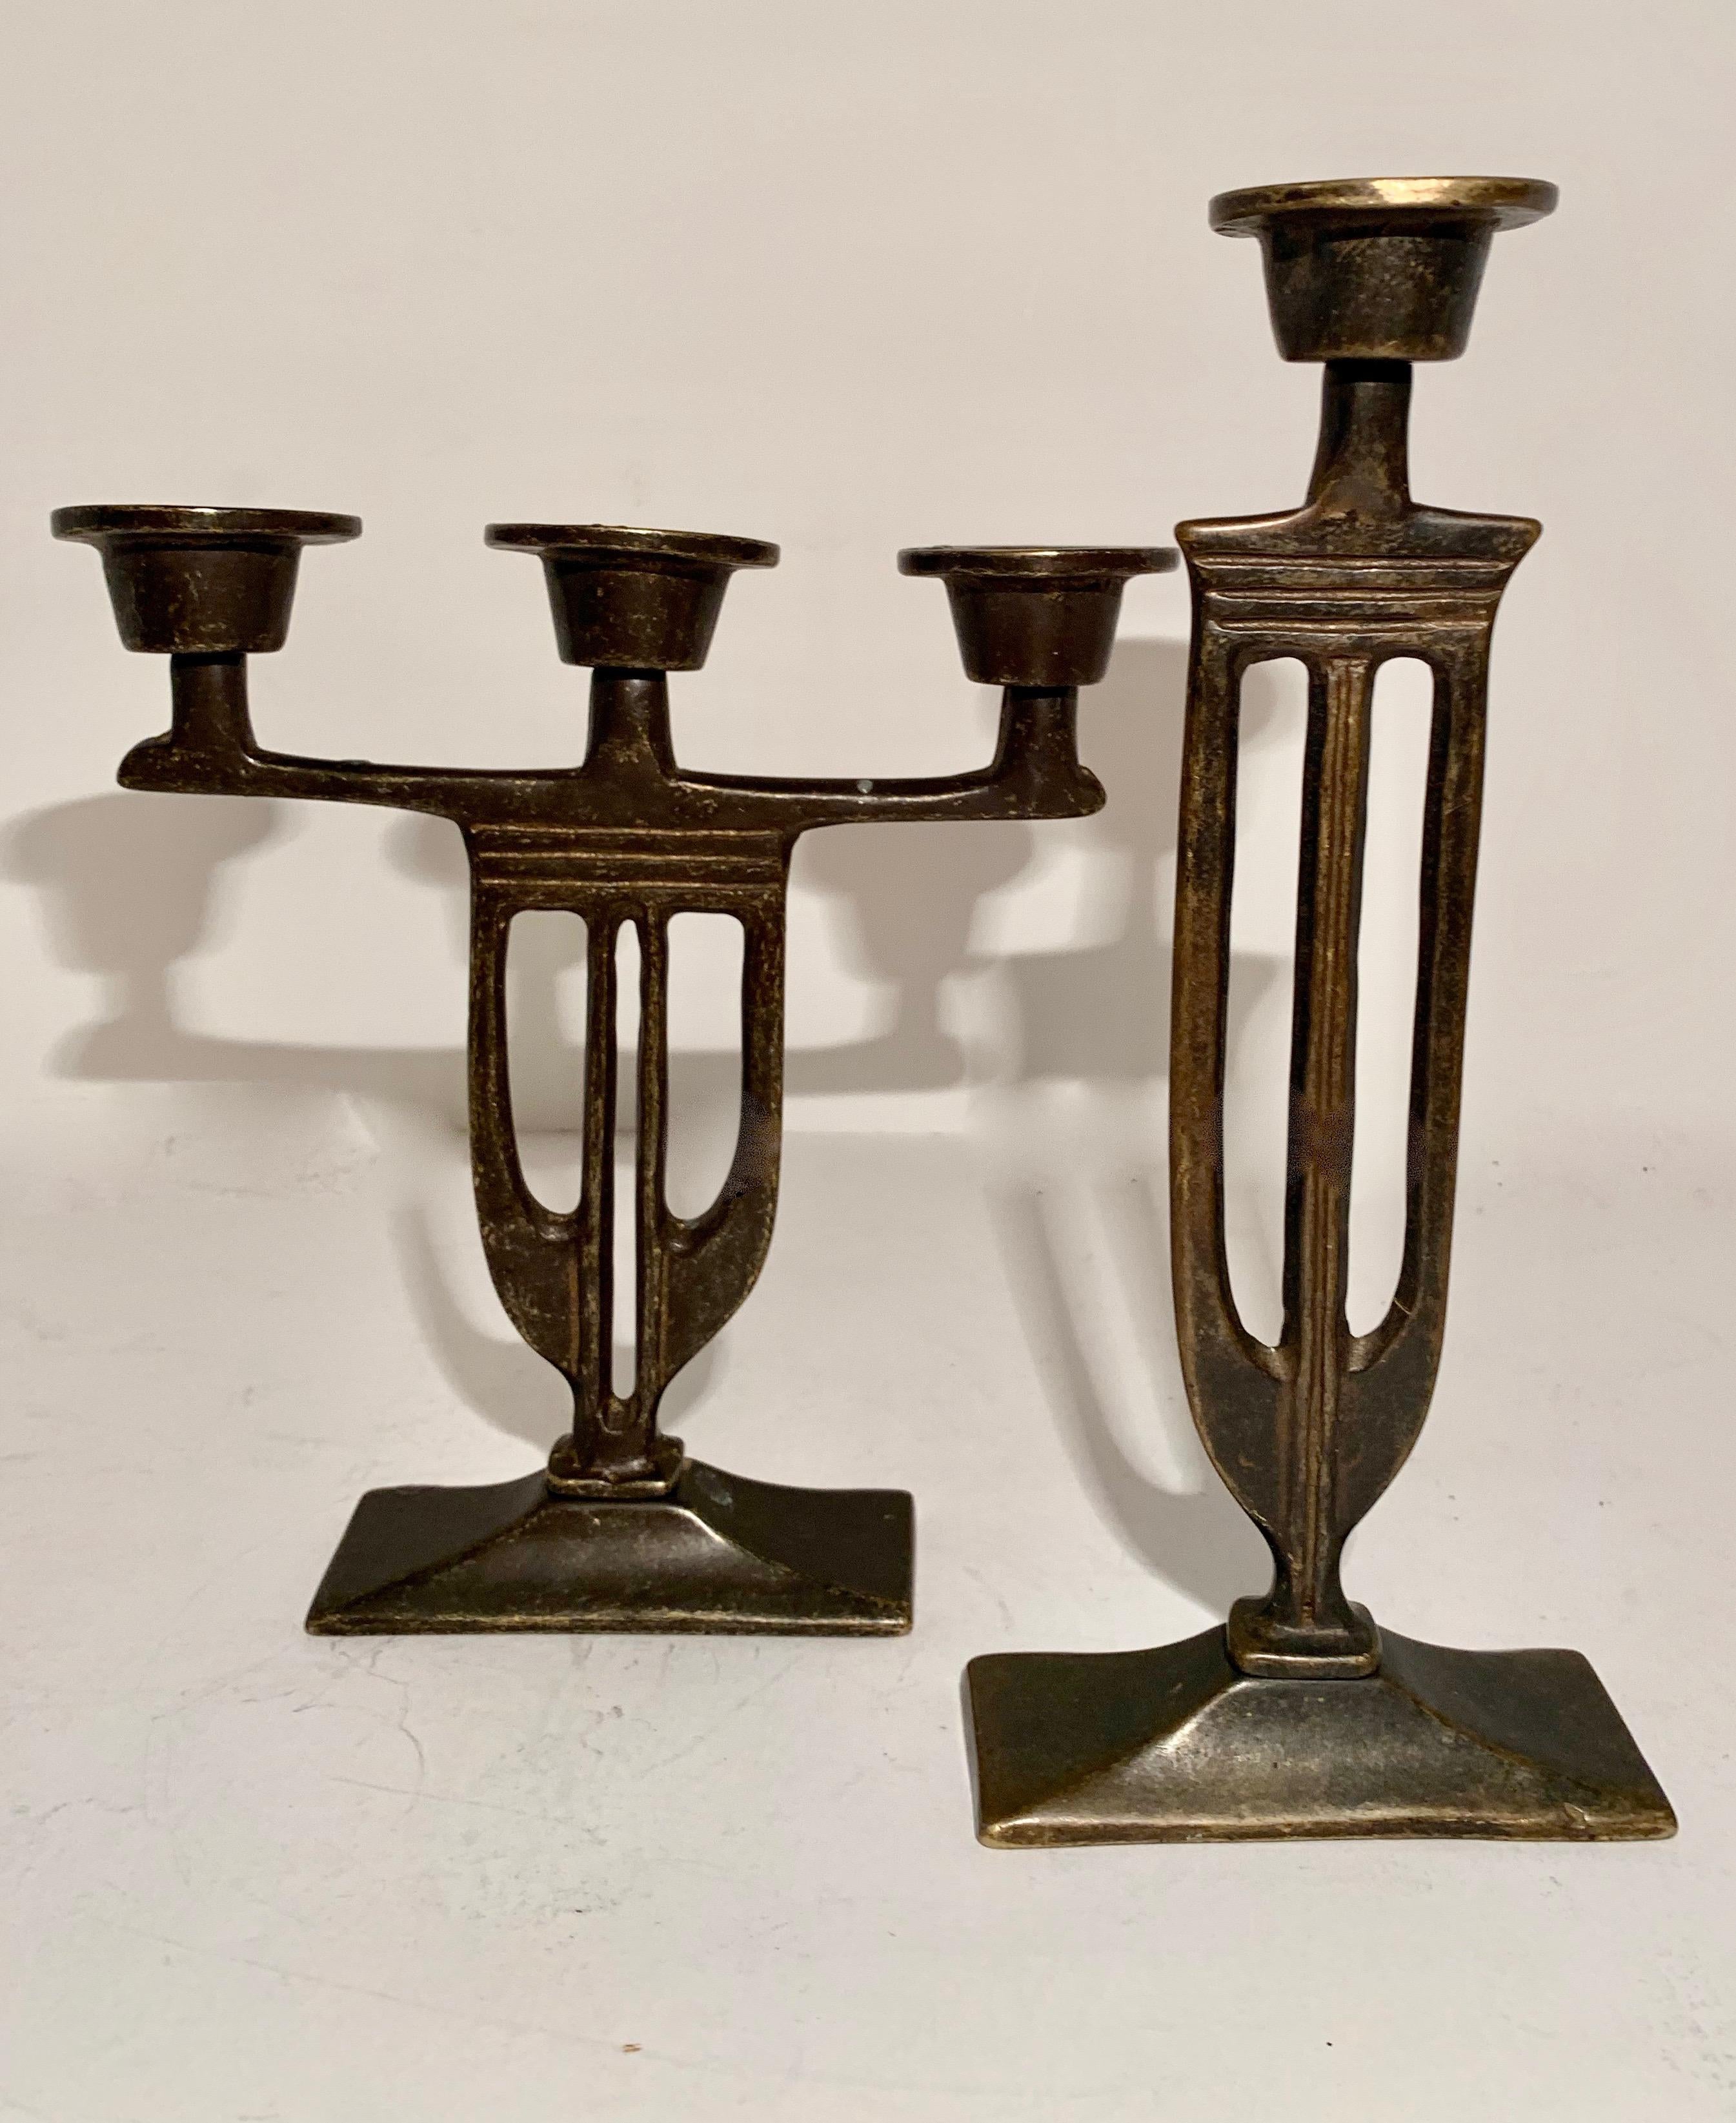 Pair of Italian Arts and Crafts Mission Style Candlesticks - this lovely pair are the perfect compliment to the Arts and Crafts space! Well made with design influenced the more organic Italian arts and crafts space

second candle stick is:
1.5